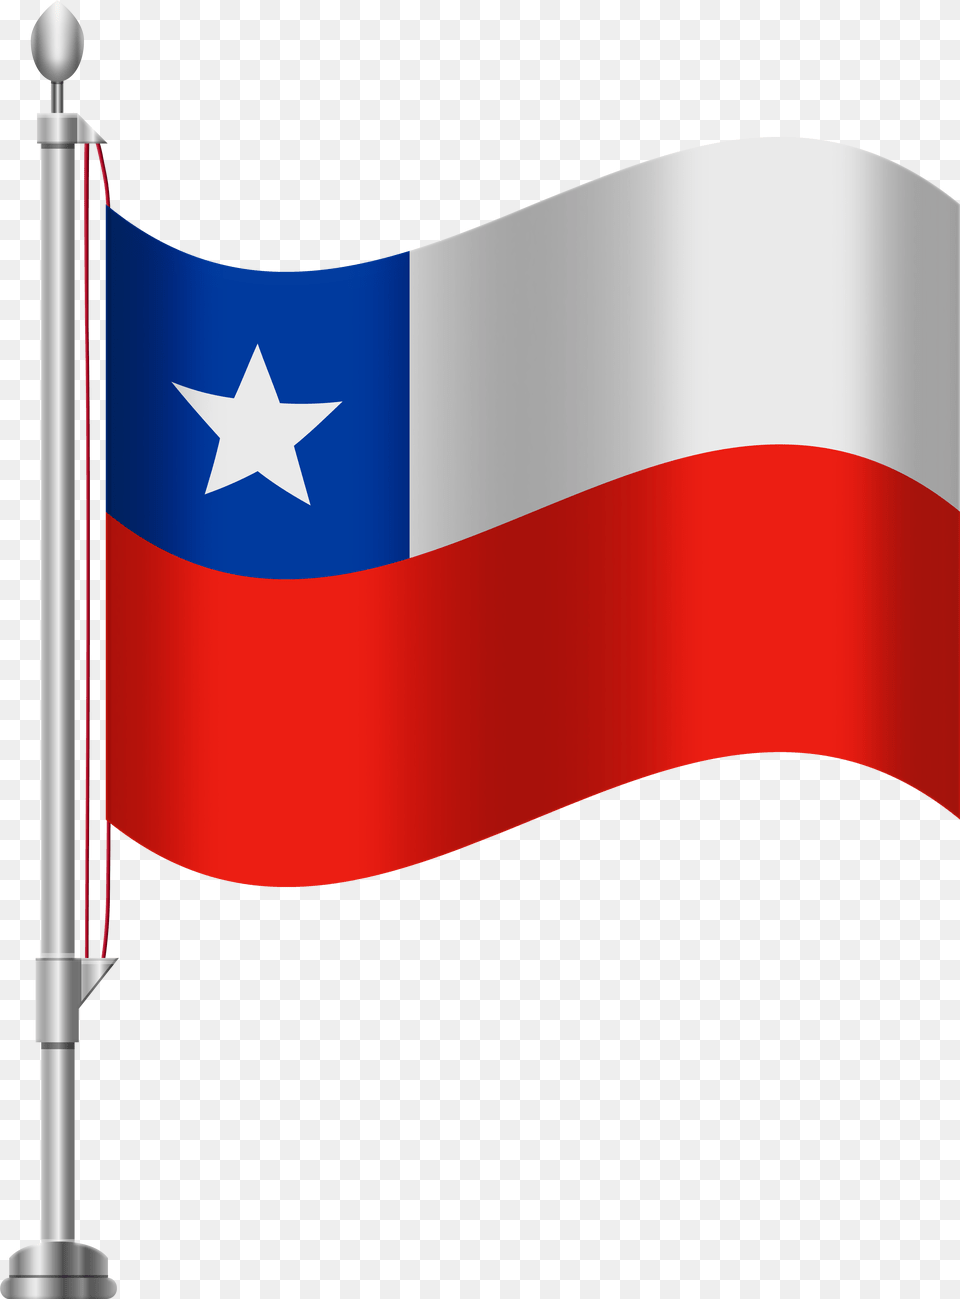 Chile Flag Clip Art, Chile Flag Png